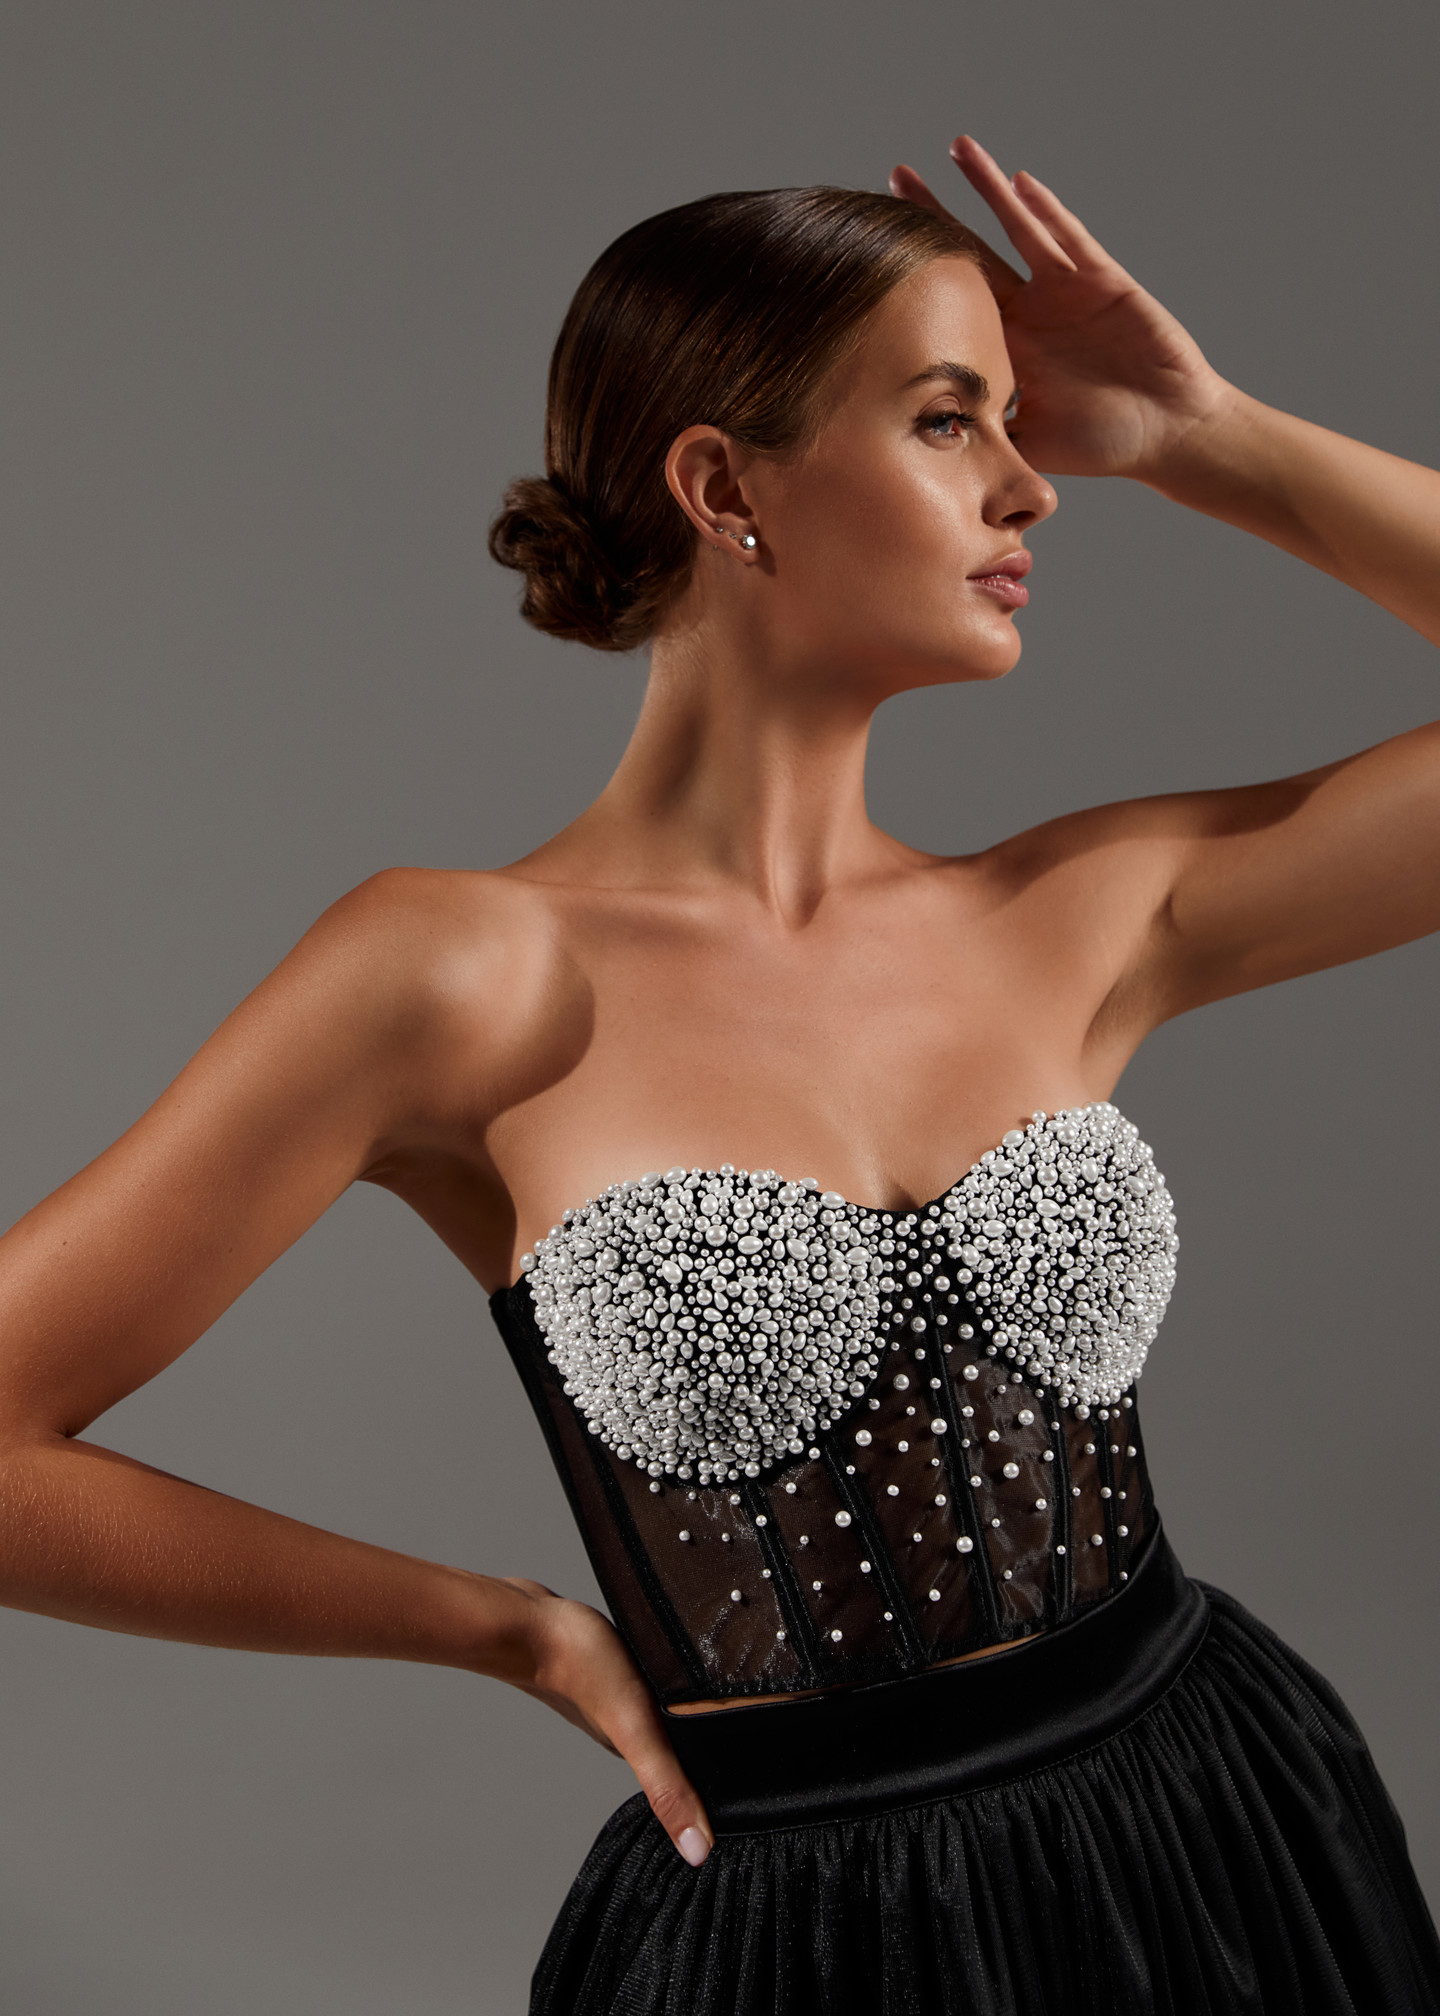 Beaded bustier, 2021, couture, top, evening, black, black look with corset #2, embroidery, corset